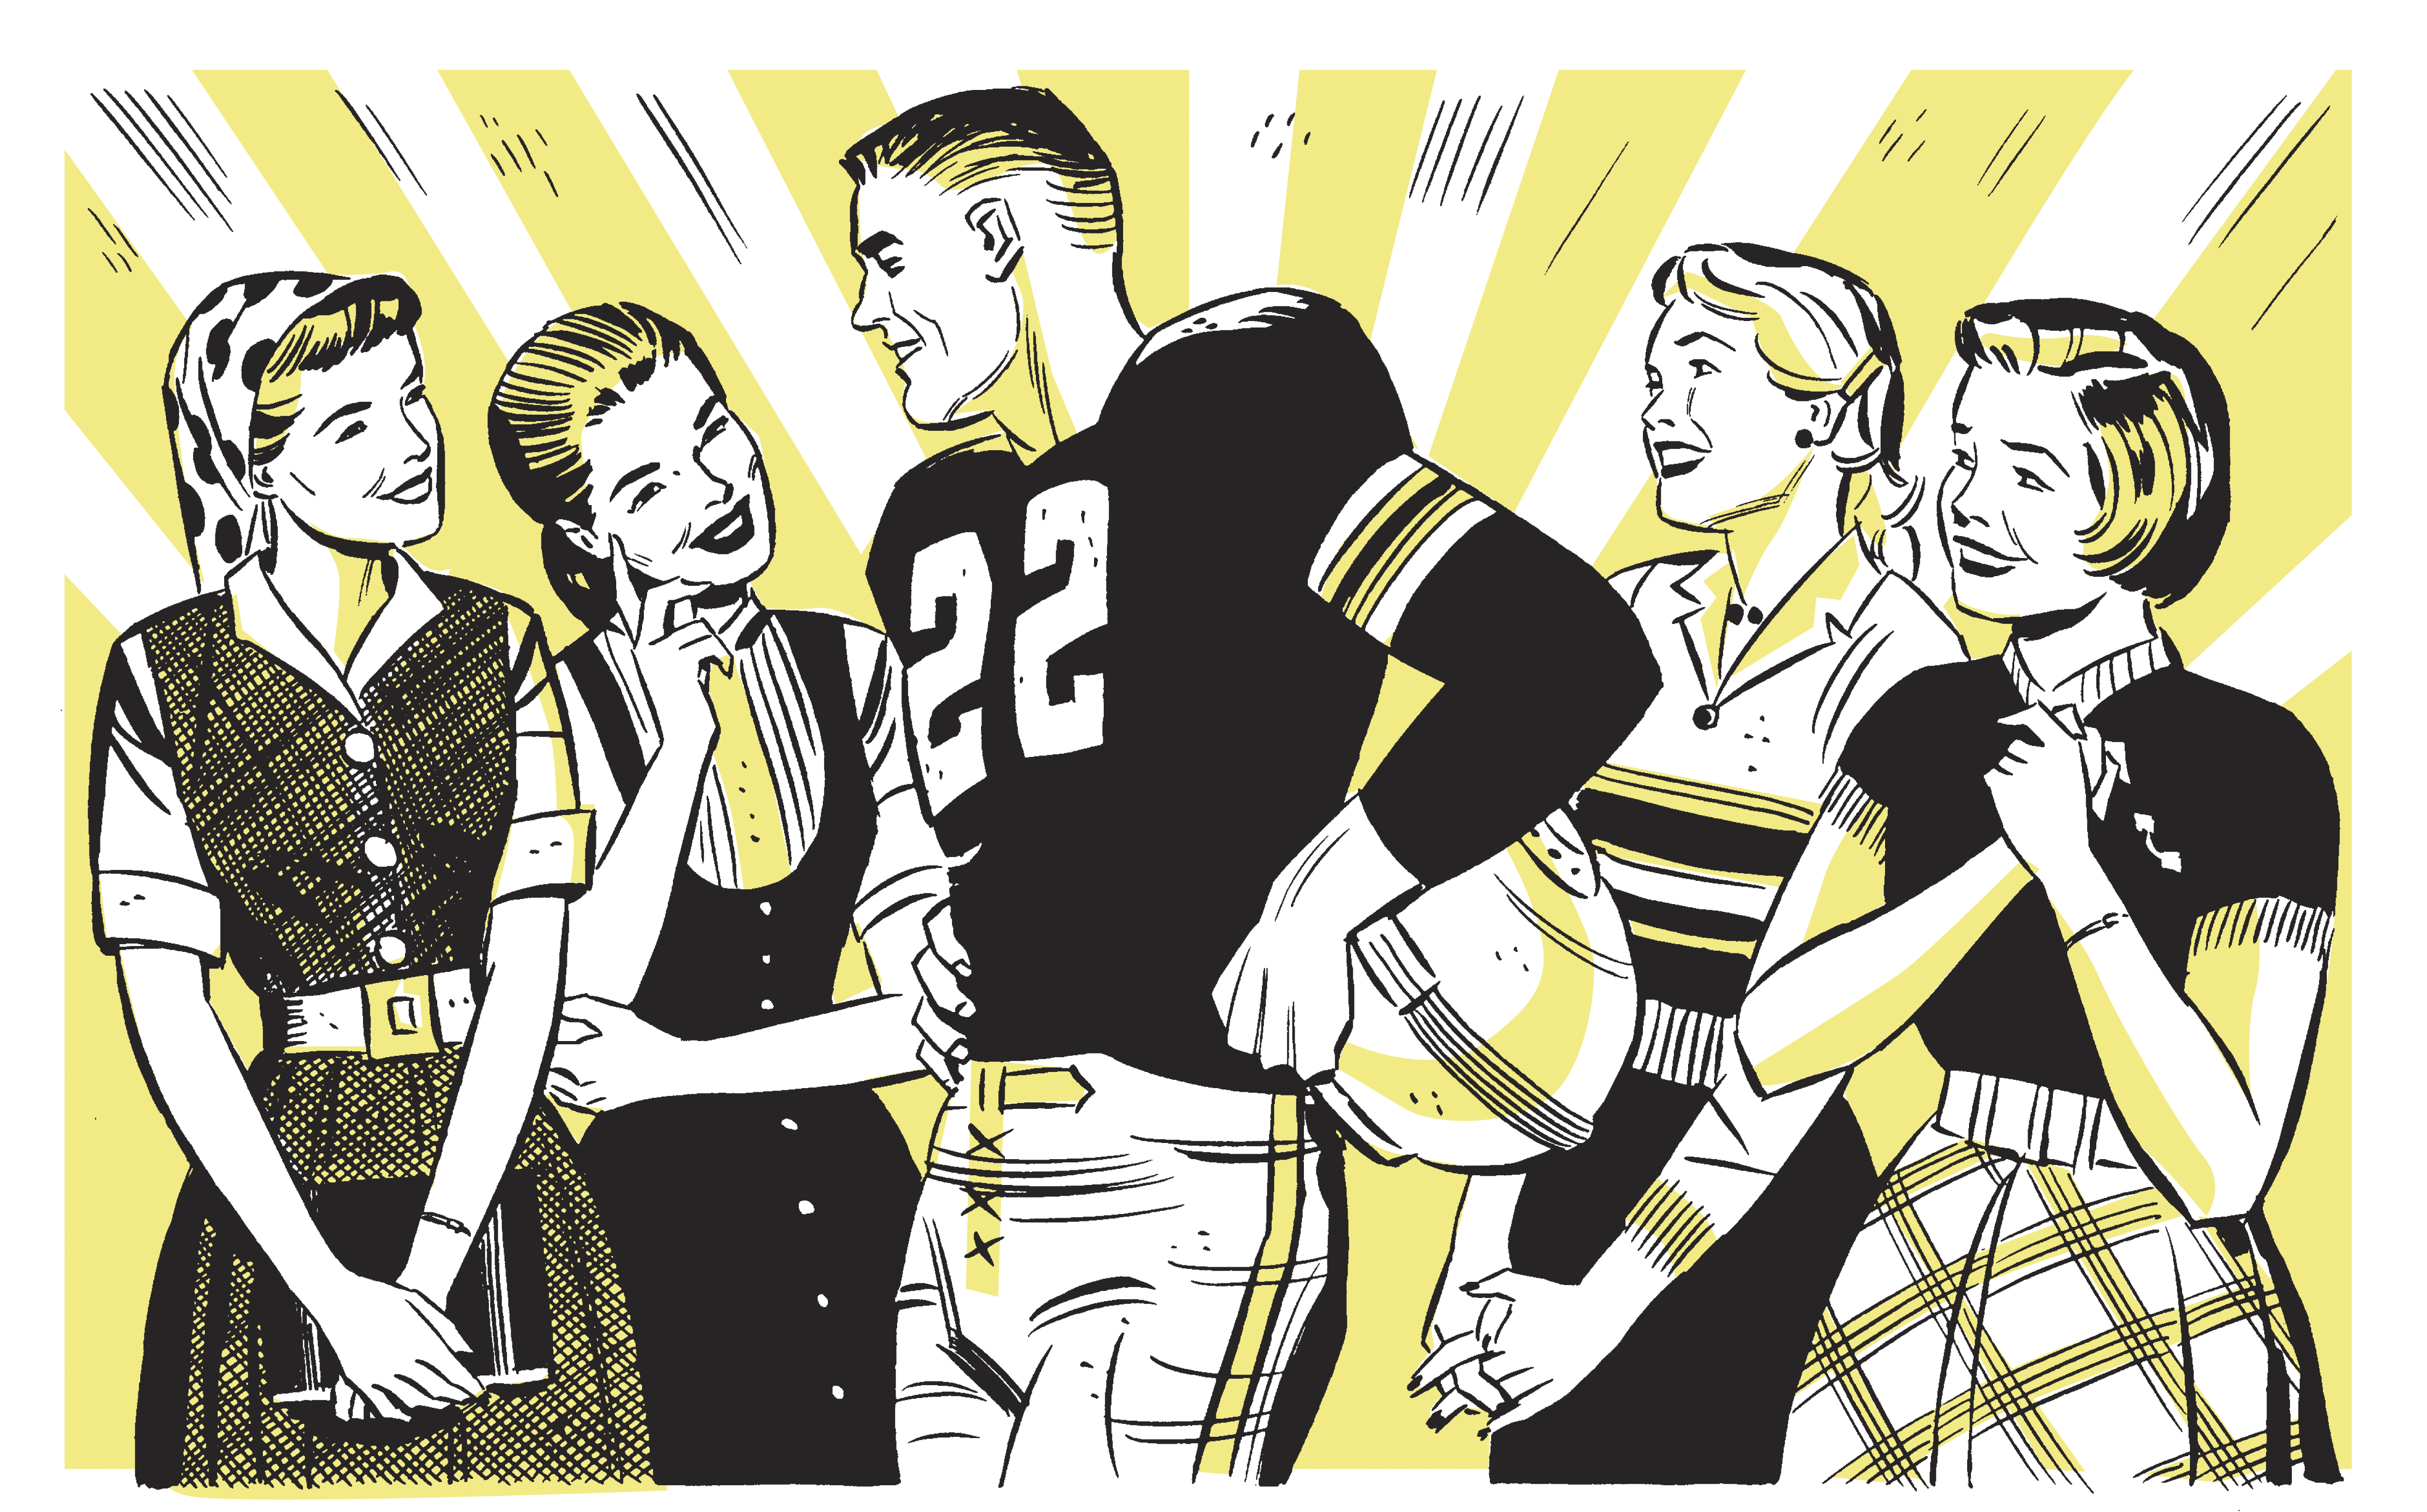 A black-and-white illustration shows a football star flirting with four adoring-looking girls. Rays of yellow light illuminate the backdrop.